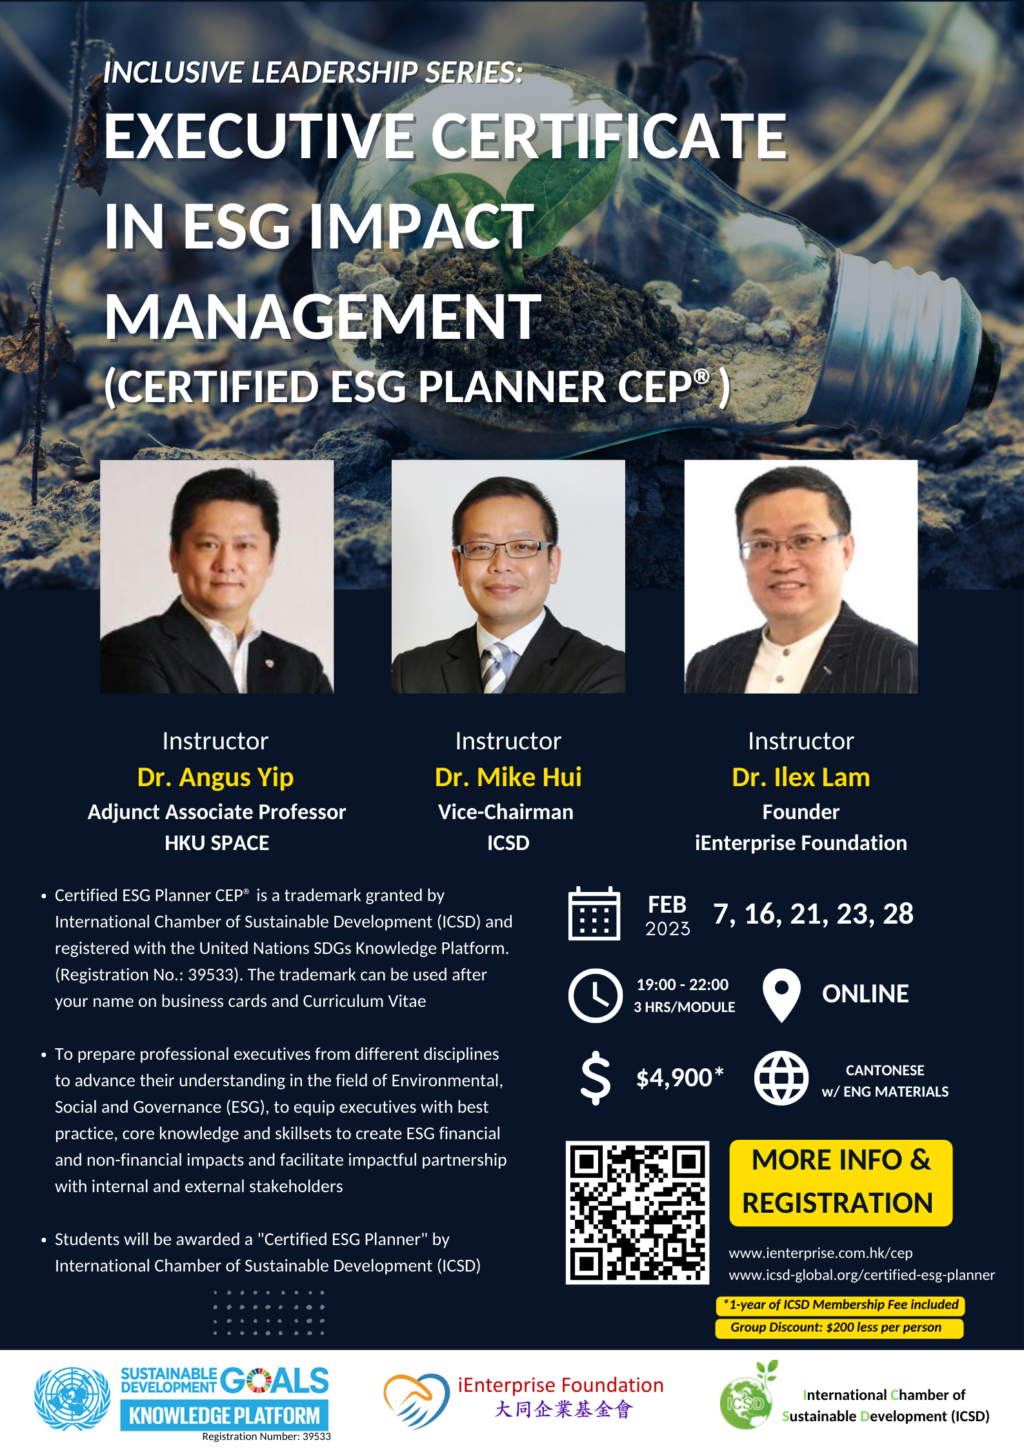 This is a poster about Inclusive Leadership Series: Executive Certificate in ESG Impact Management (Certified ESG Planner CEP®). The information above is mentioned with text in the collapsible parts below.
You may click the poster and it will redirect you to the course's page.